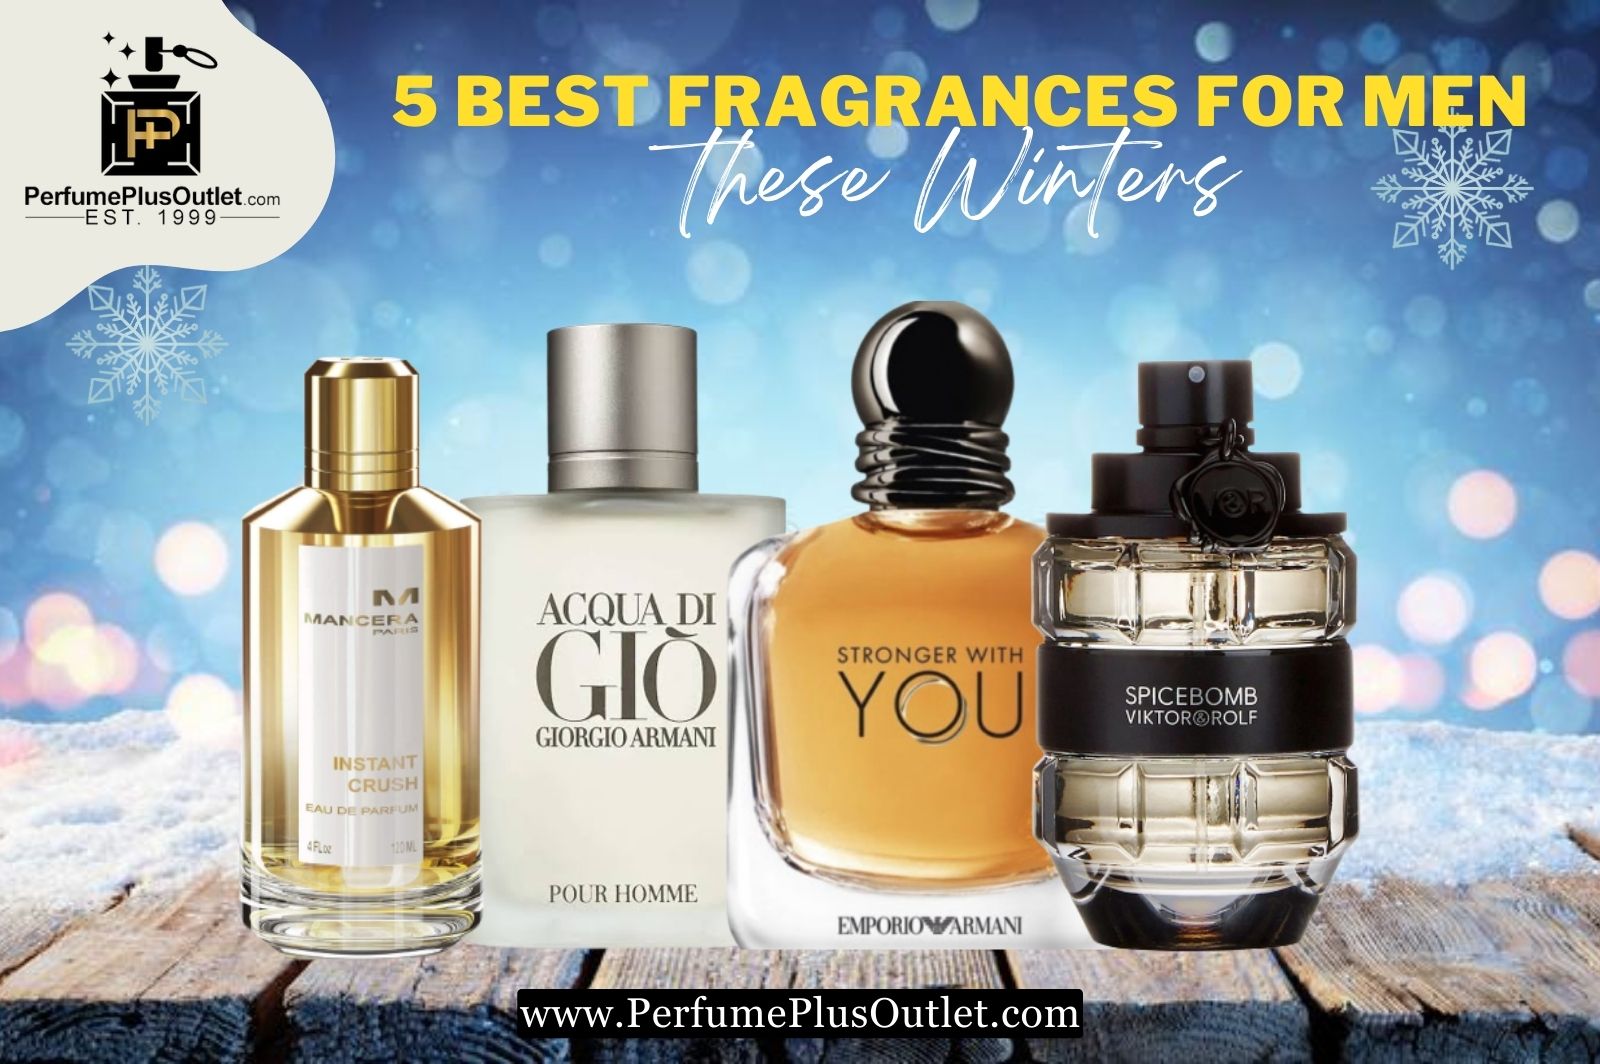 5 Best Fragrances For Men these Winters